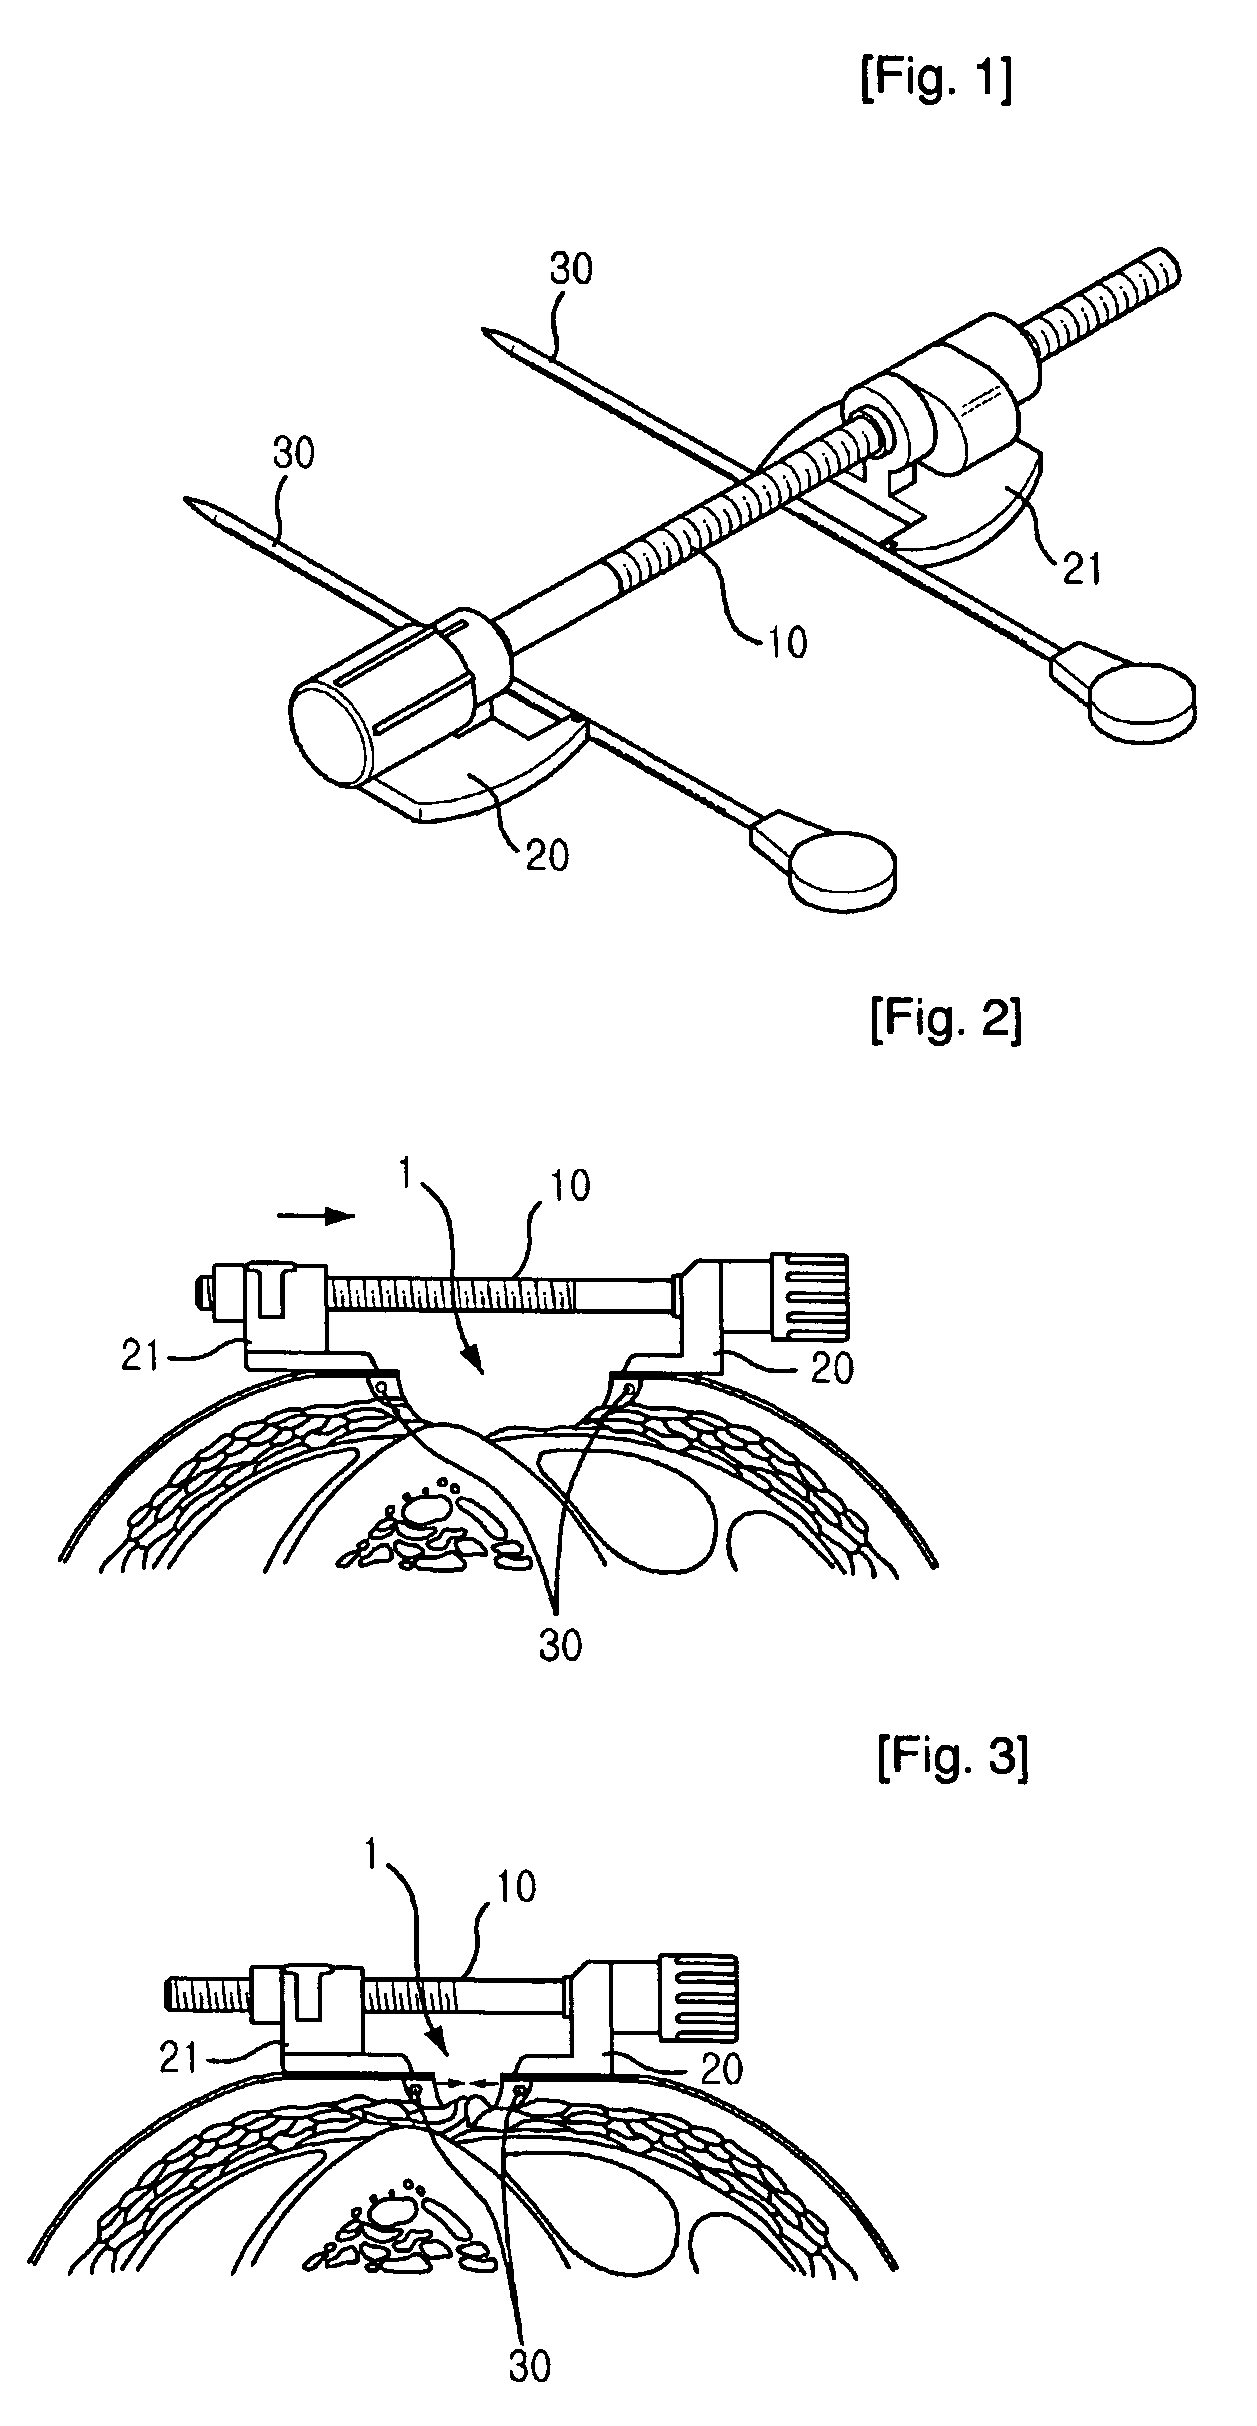 Wound Closure Assisting and Maintaining Apparatus